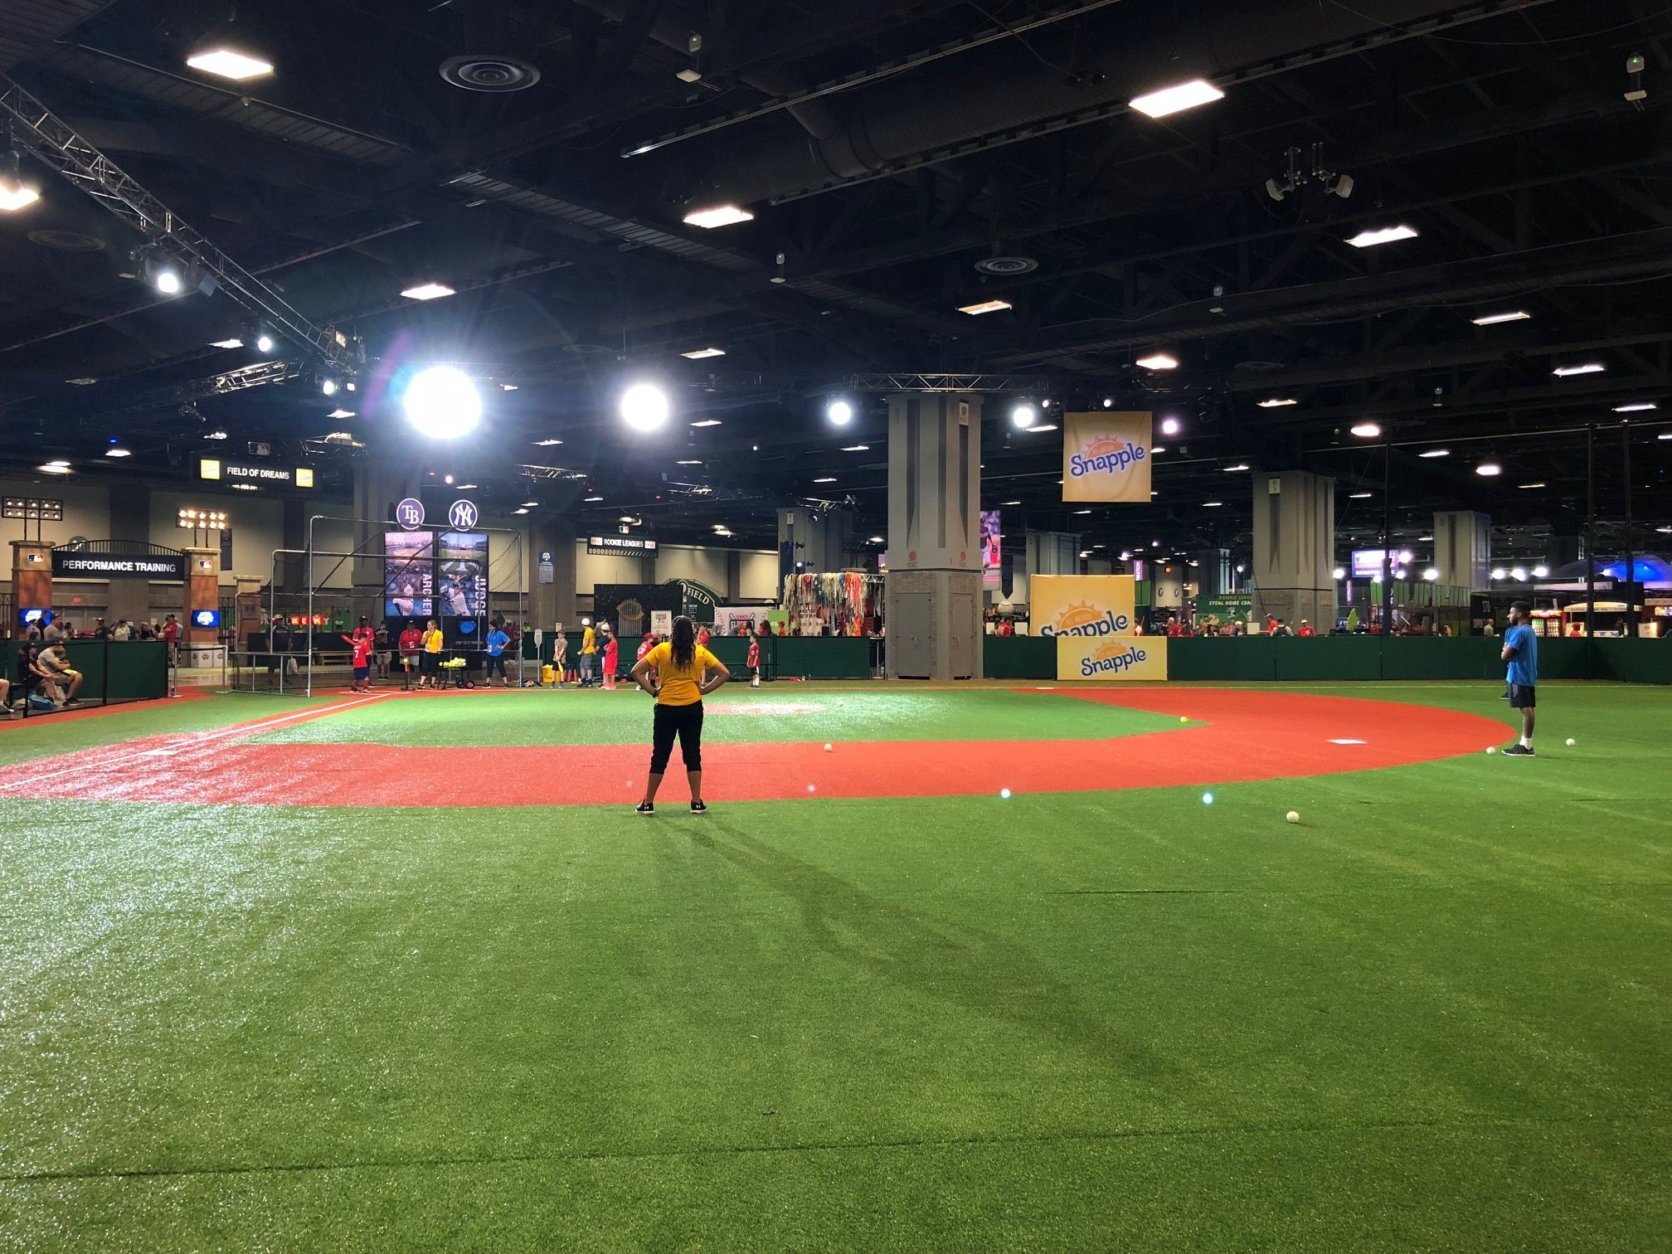  There are indoor baseball diamonds for kids, as well as batting cages and virtual reality baseball experiences. (WTOP/John Aaron)